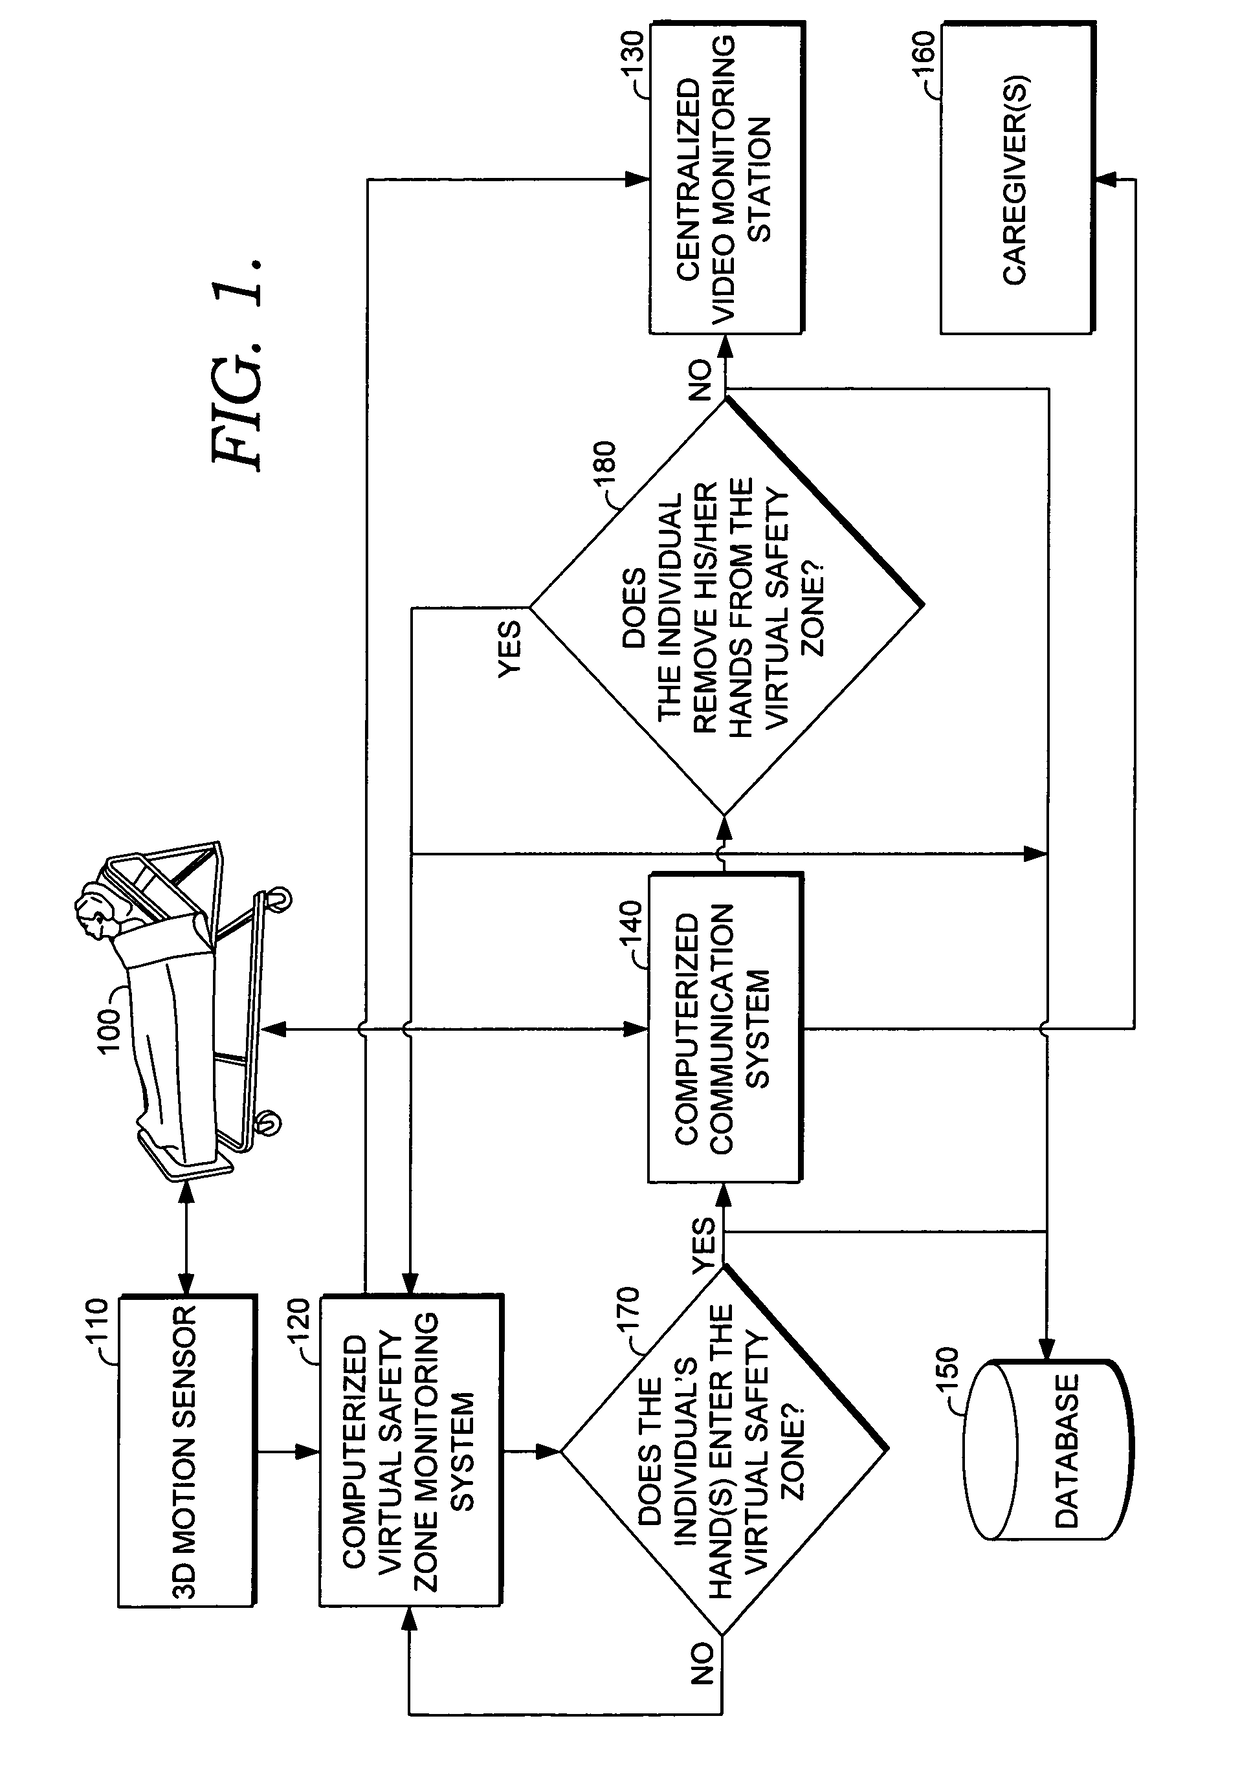 Method and system for determining whether a monitored individual's hand(s) have entered a virtual safety zone